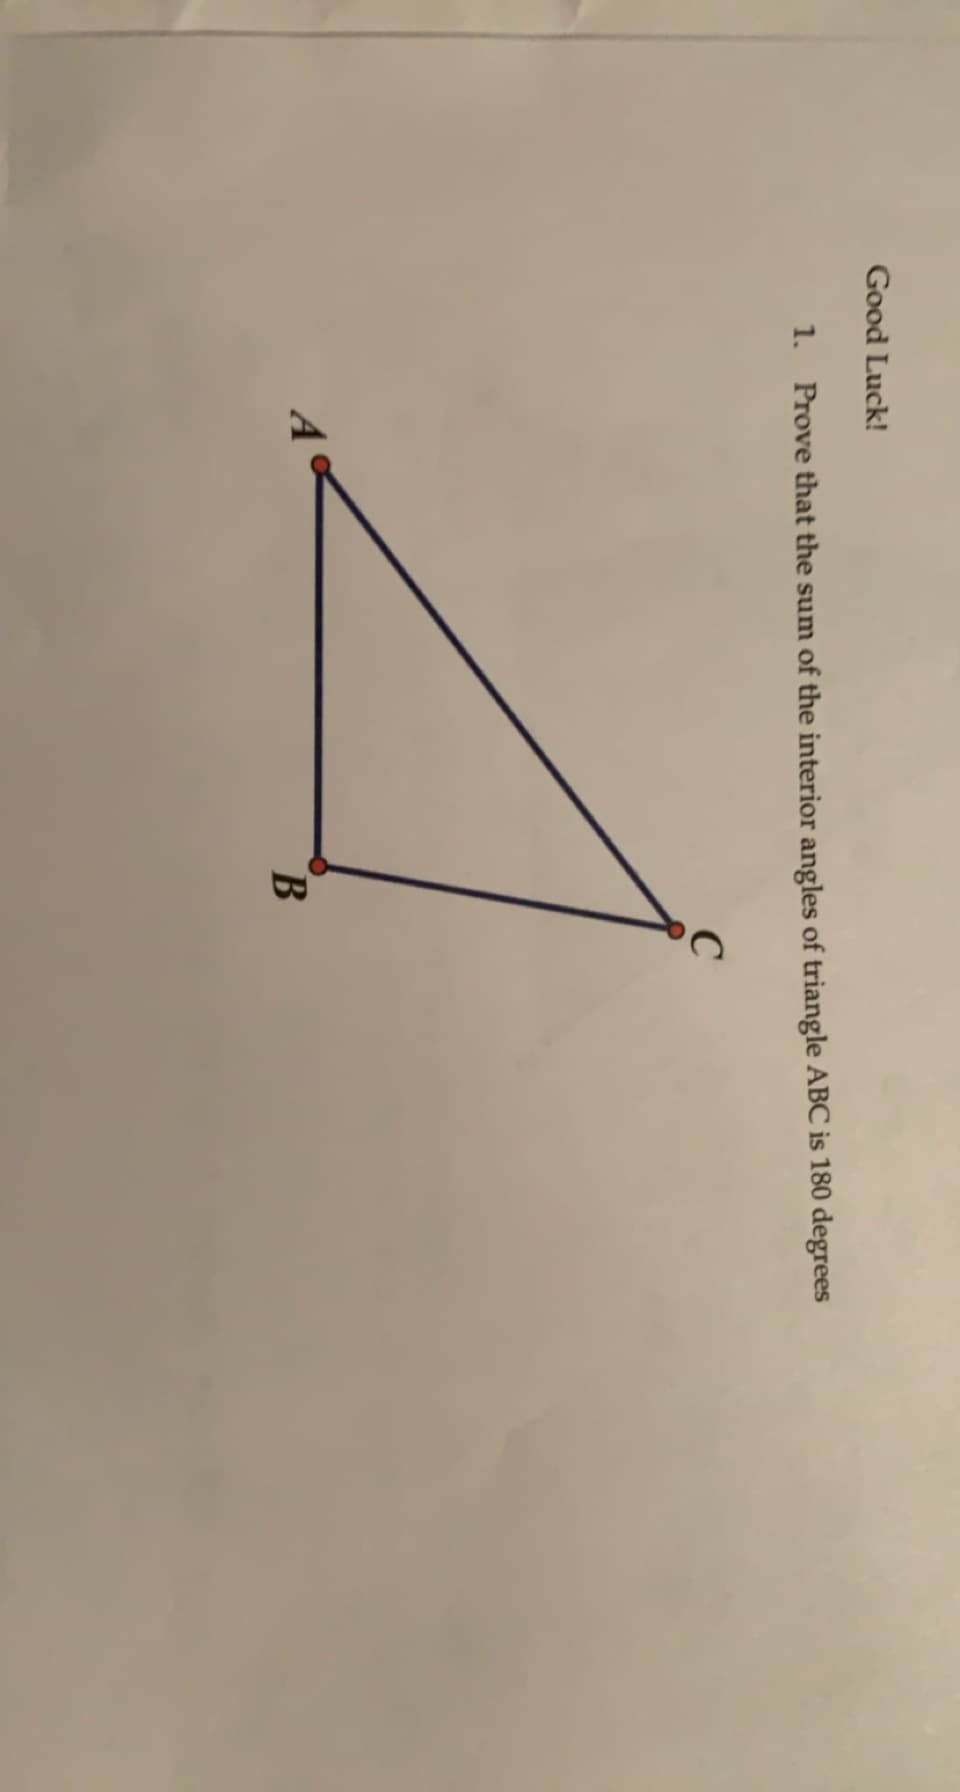 Good Luck!
1. Prove that the sum of the interior angles of triangle ABC is 180 degrees
A
B.
